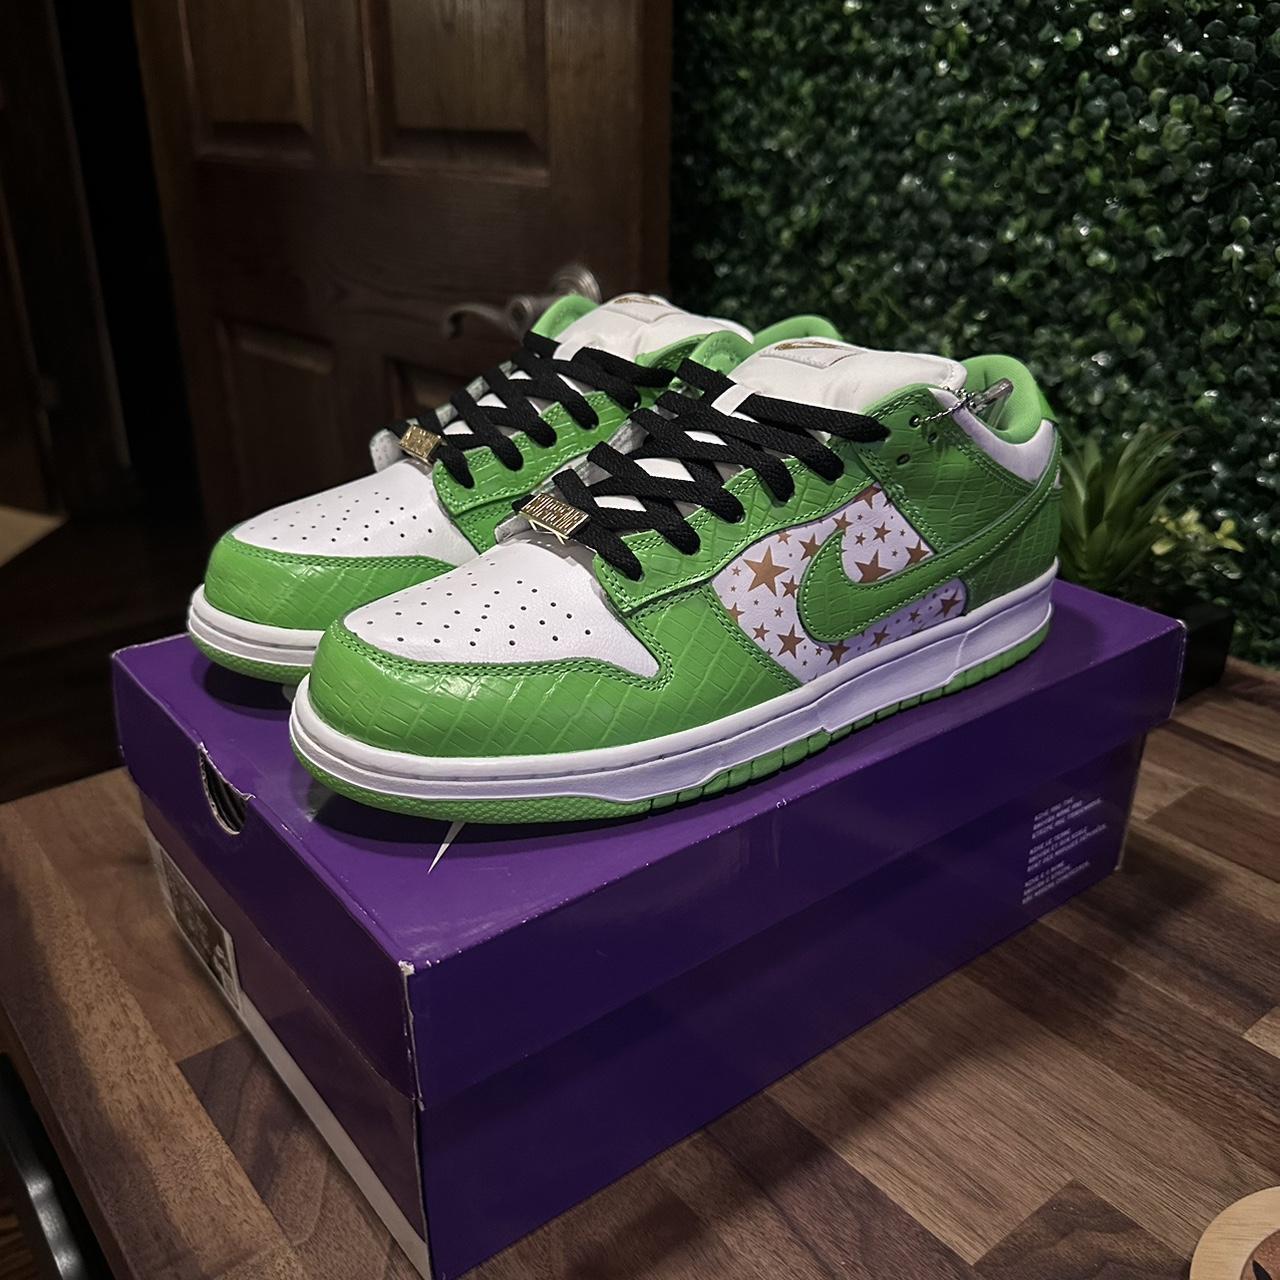 Supreme Men's Green and White Trainers | Depop